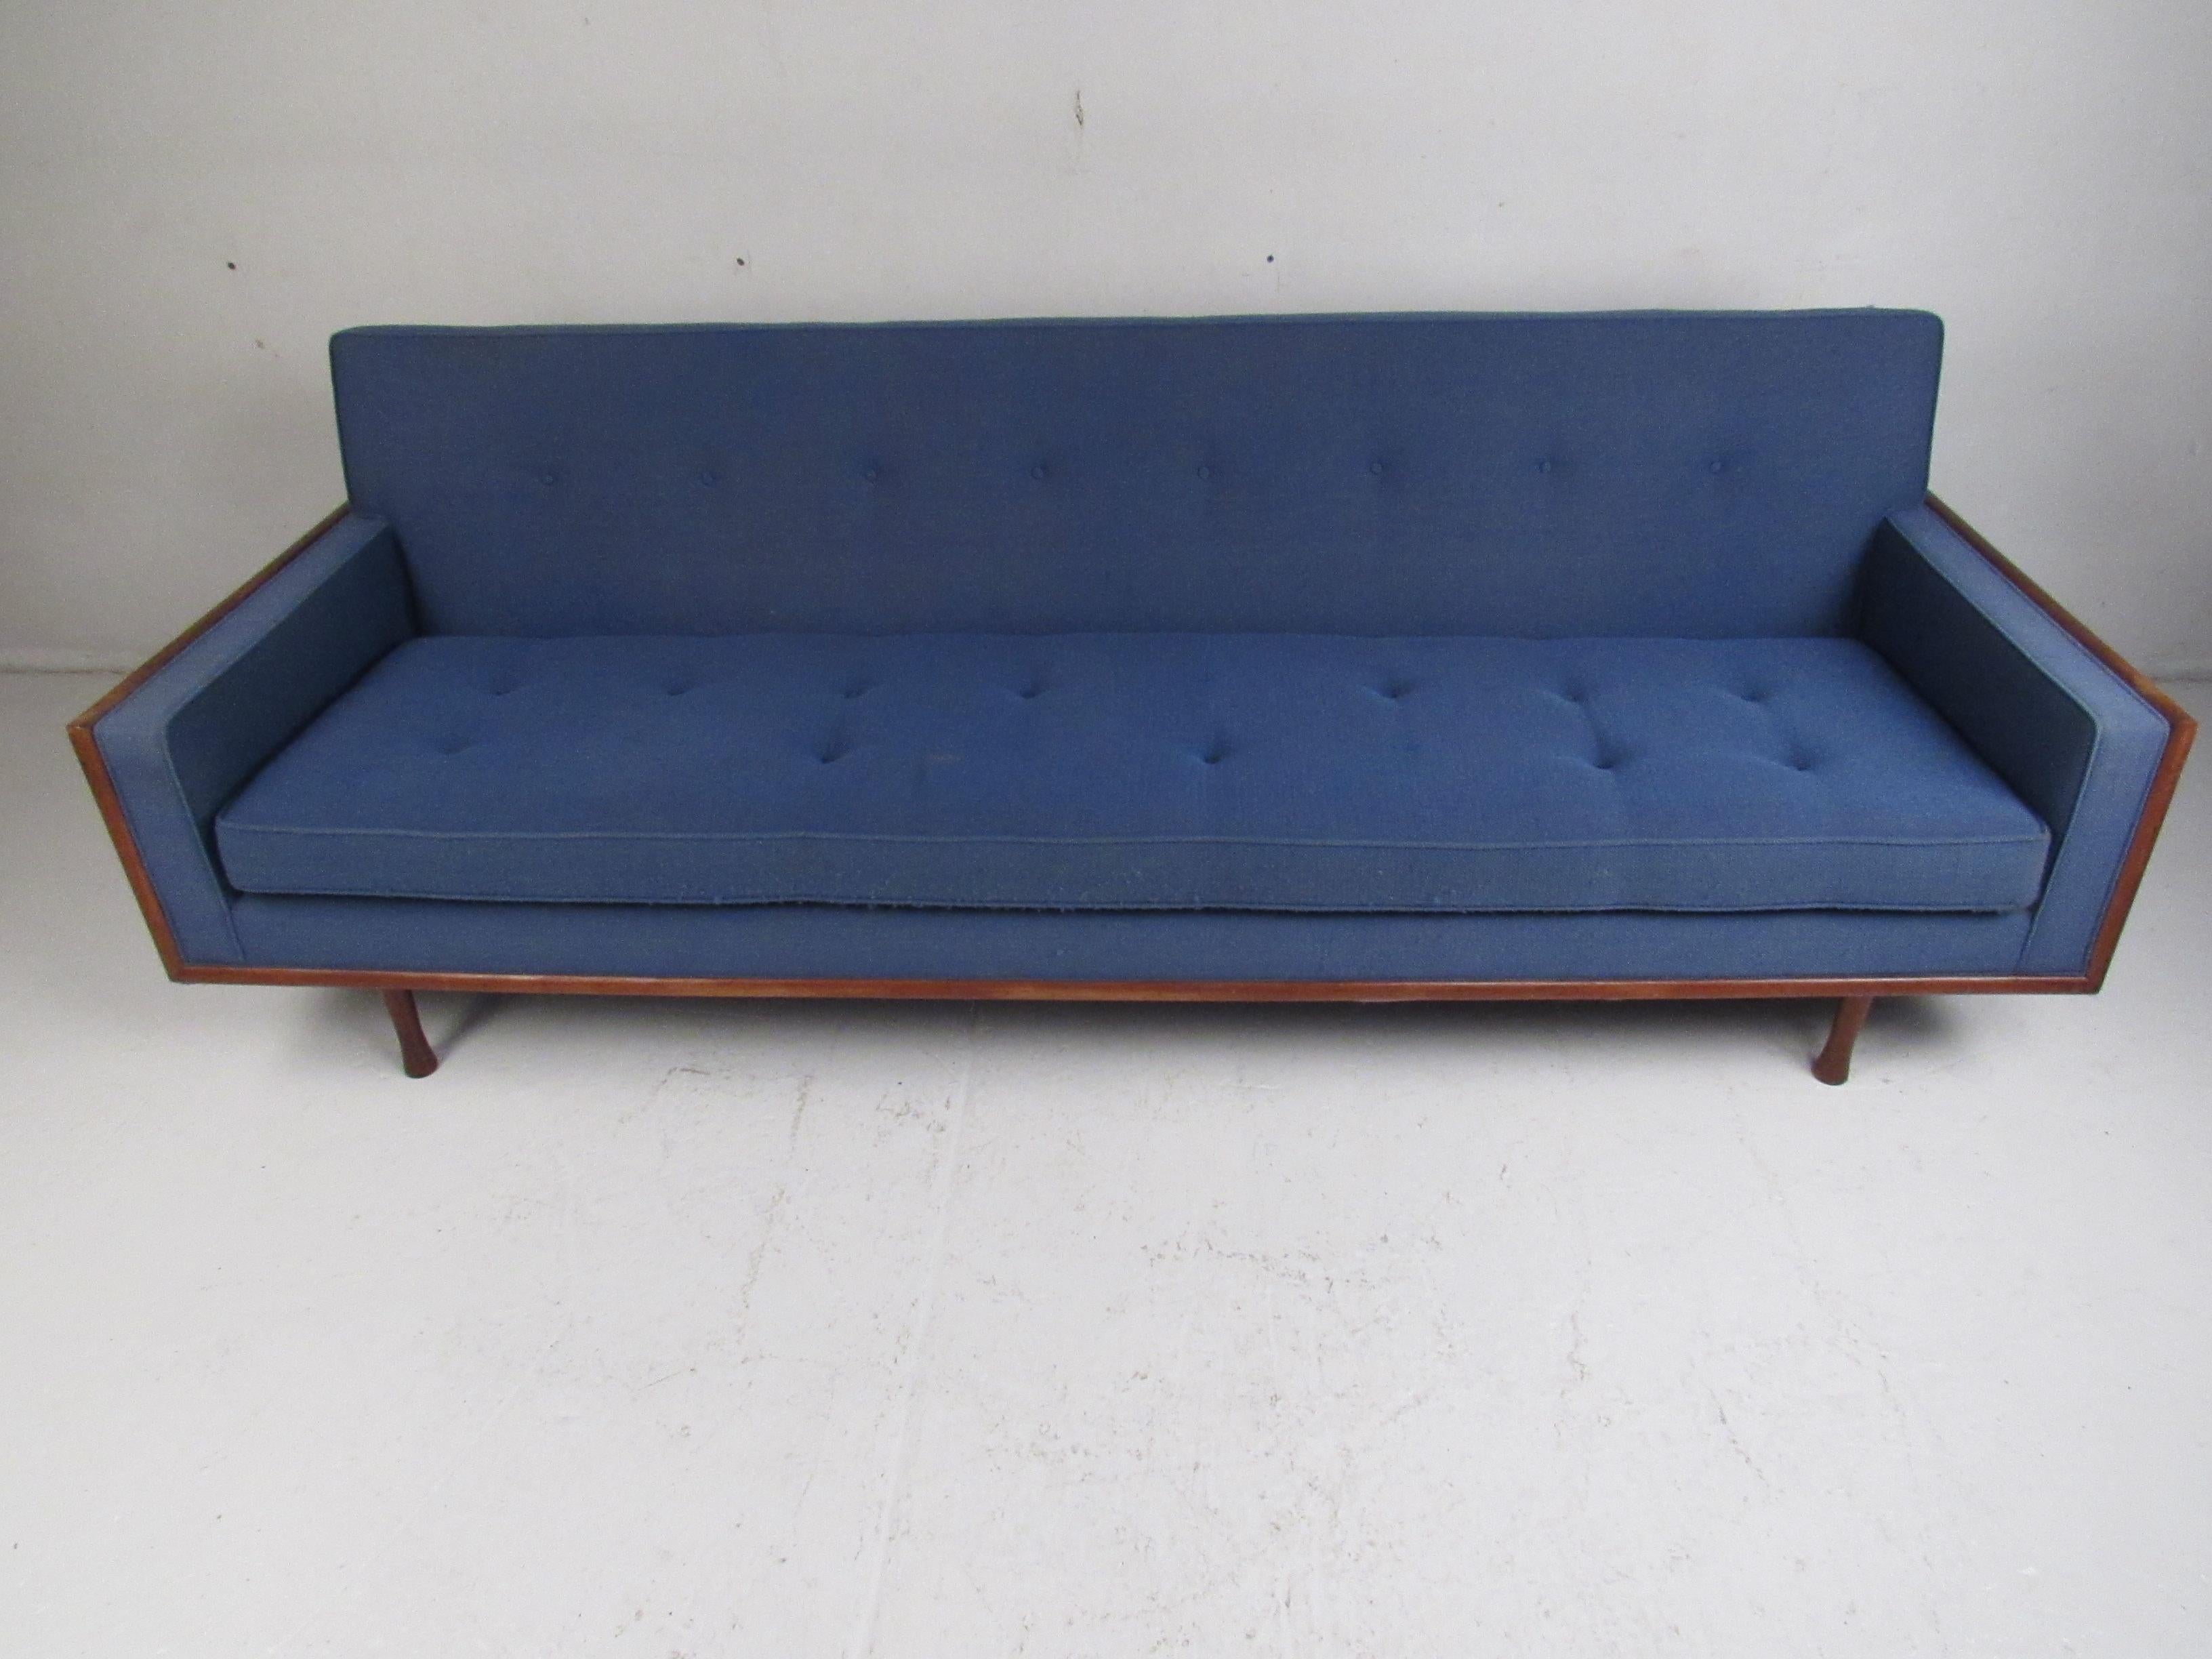 This attractive vintage modern sofa boasts a single overstuffed cushion covered in a plush royal blue upholstery. The unique drum stick shaped legs and walnut trim along the edges add to the allure. A straight line midcentury design with tufted